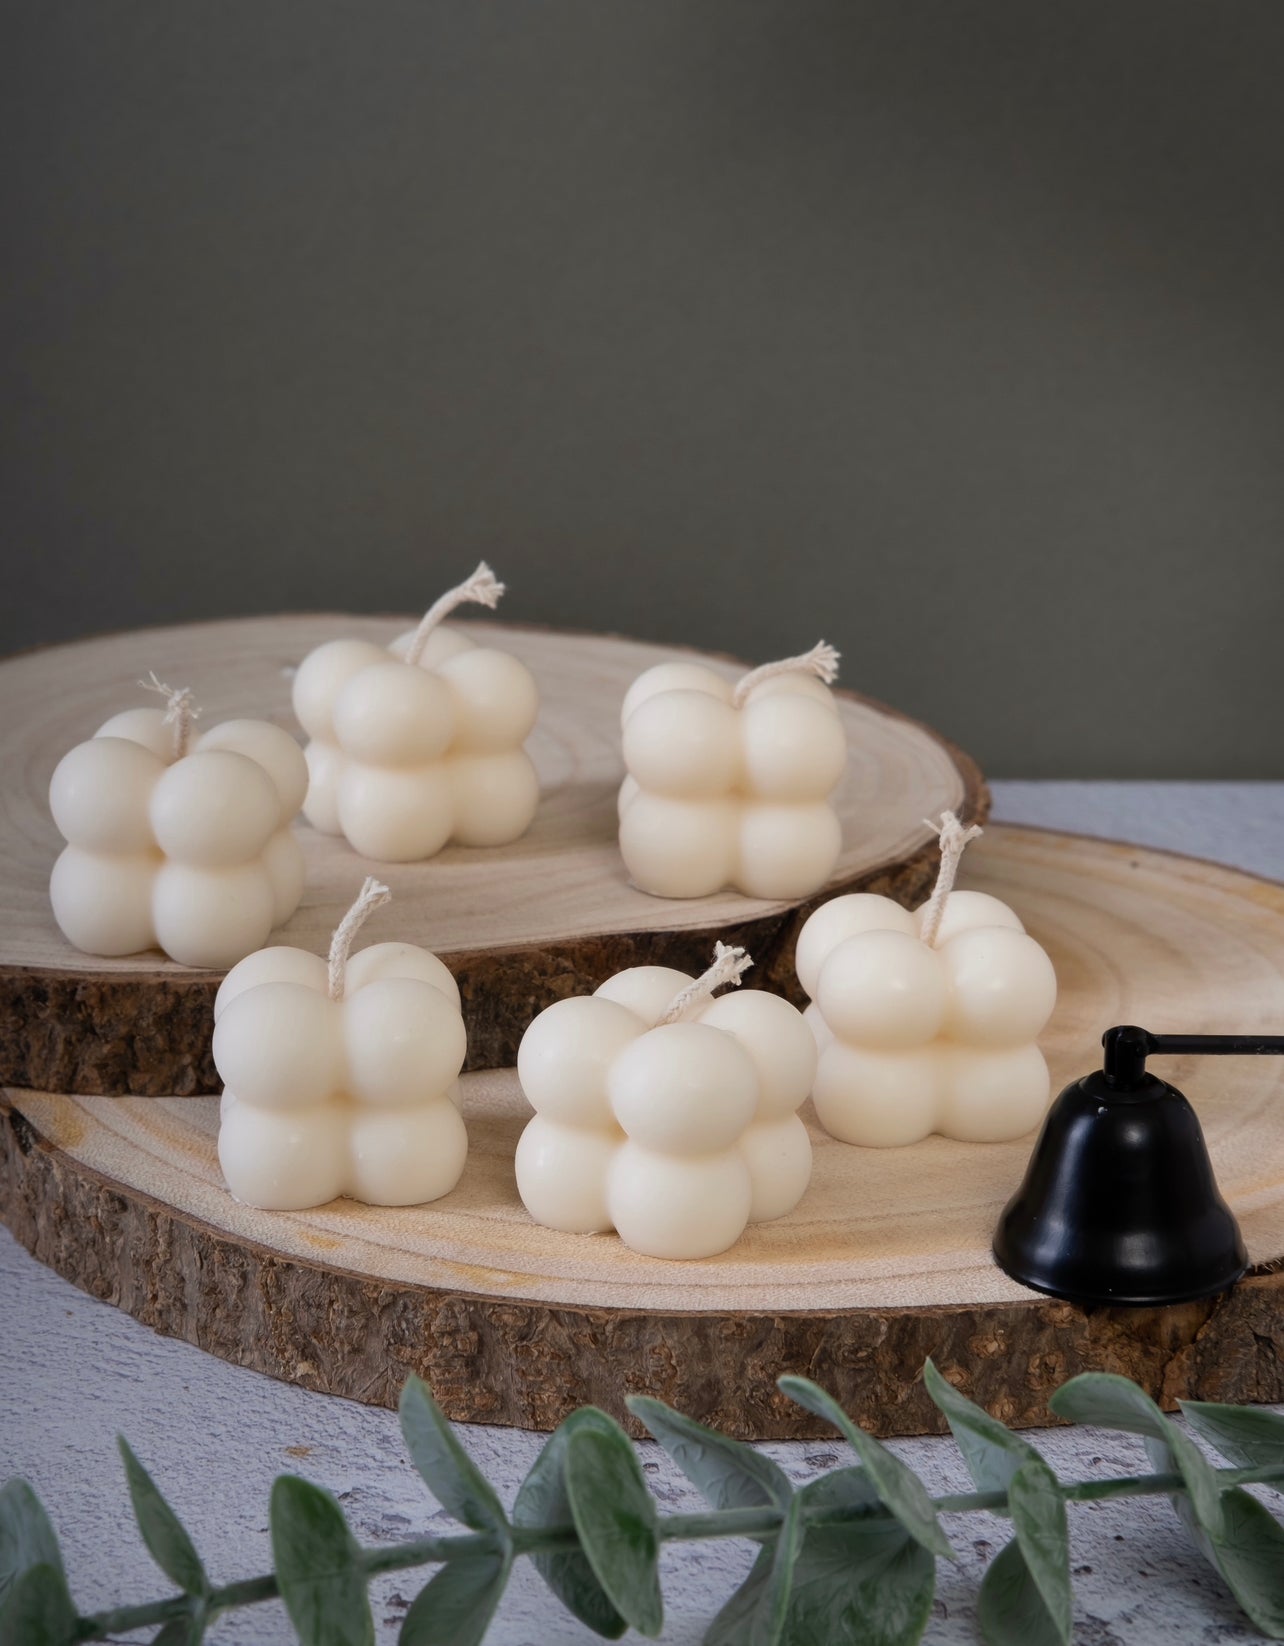 Square Bubble Candles for Relaxation ✓ - Axiom Home